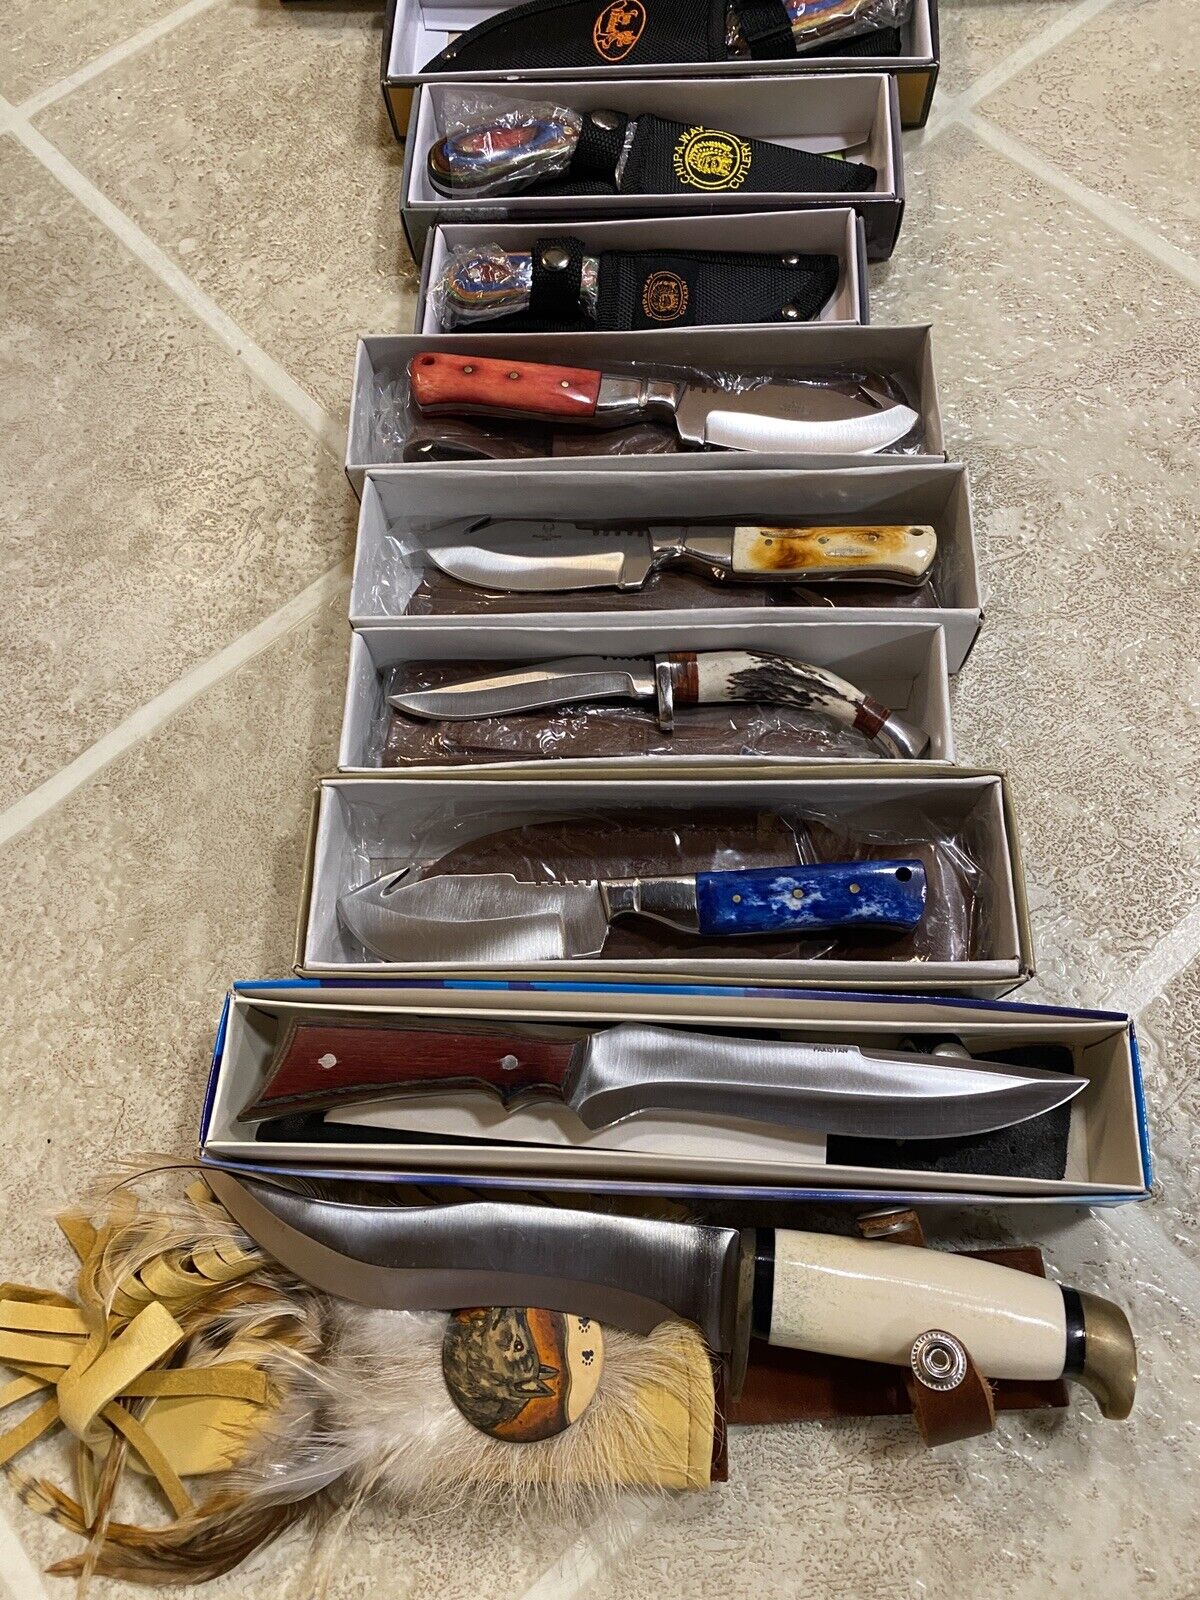 LOT of 11 Knifes - BRAND NEW - Frost Cutlery, Whitetail Cutlery.